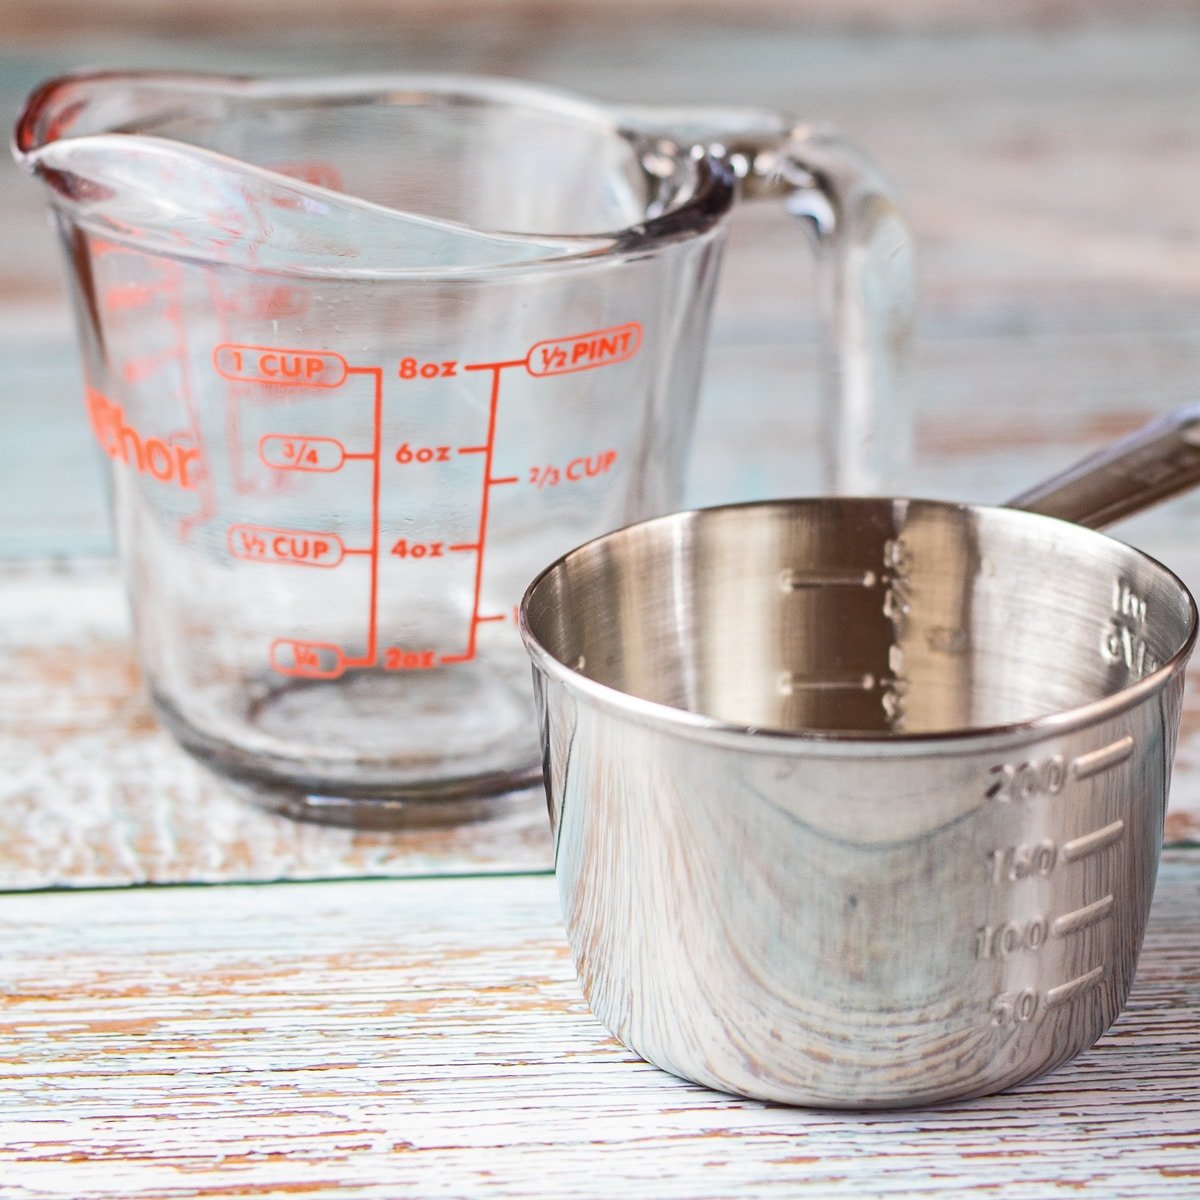 How Many Ounces In A Cup: Easy Conversions For Liquid Or Dry!